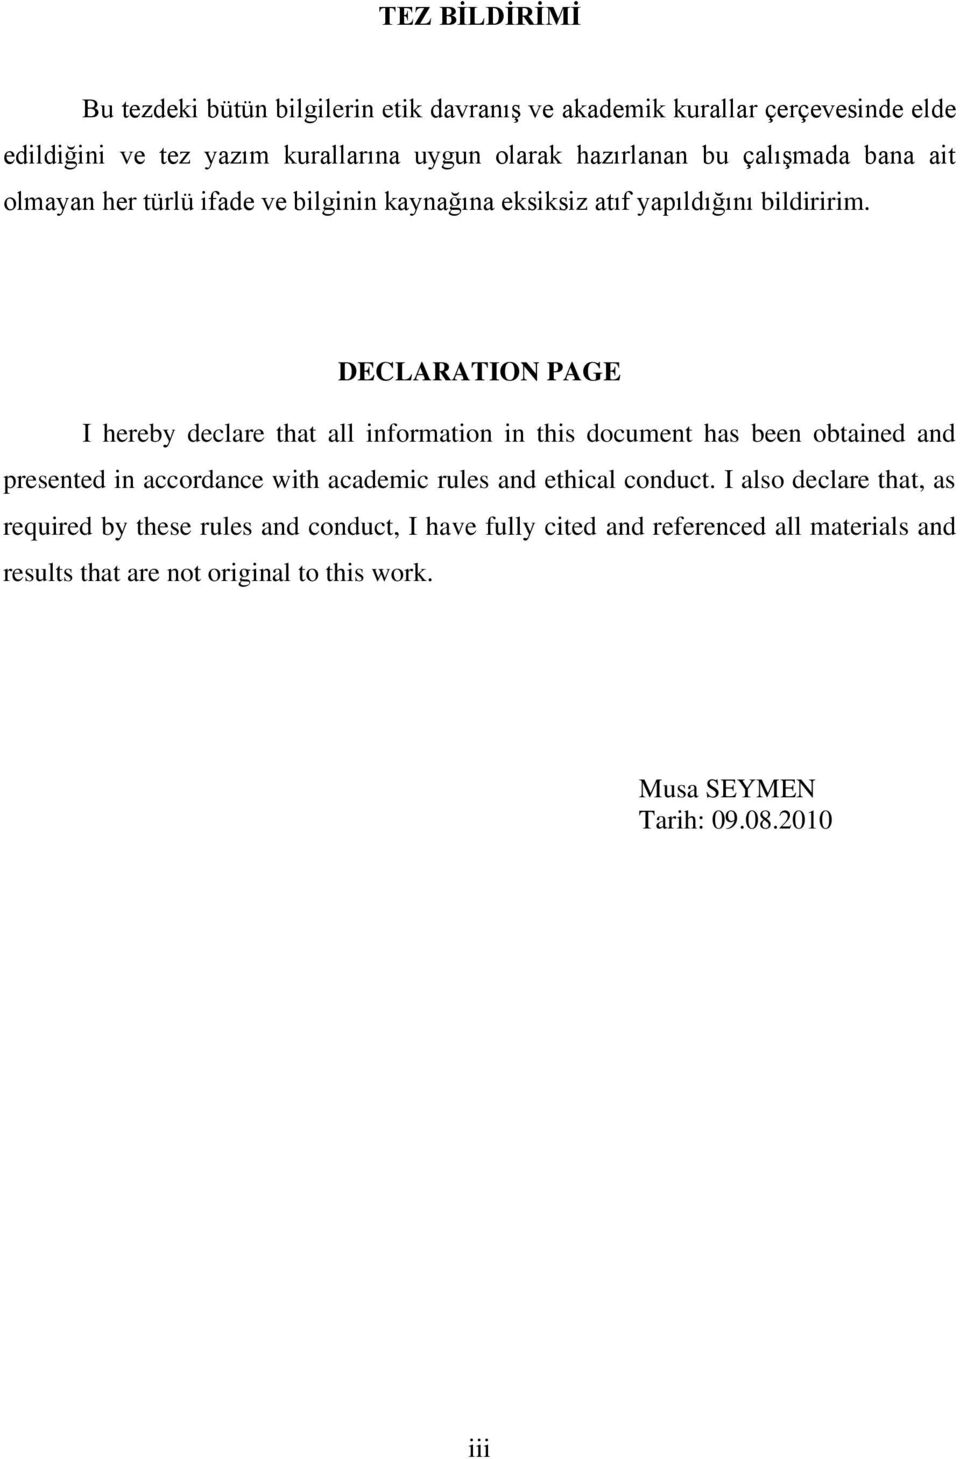 DECLARATION PAGE I hereby declare that all information in this document has been obtained and presented in accordance with academic rules and ethical